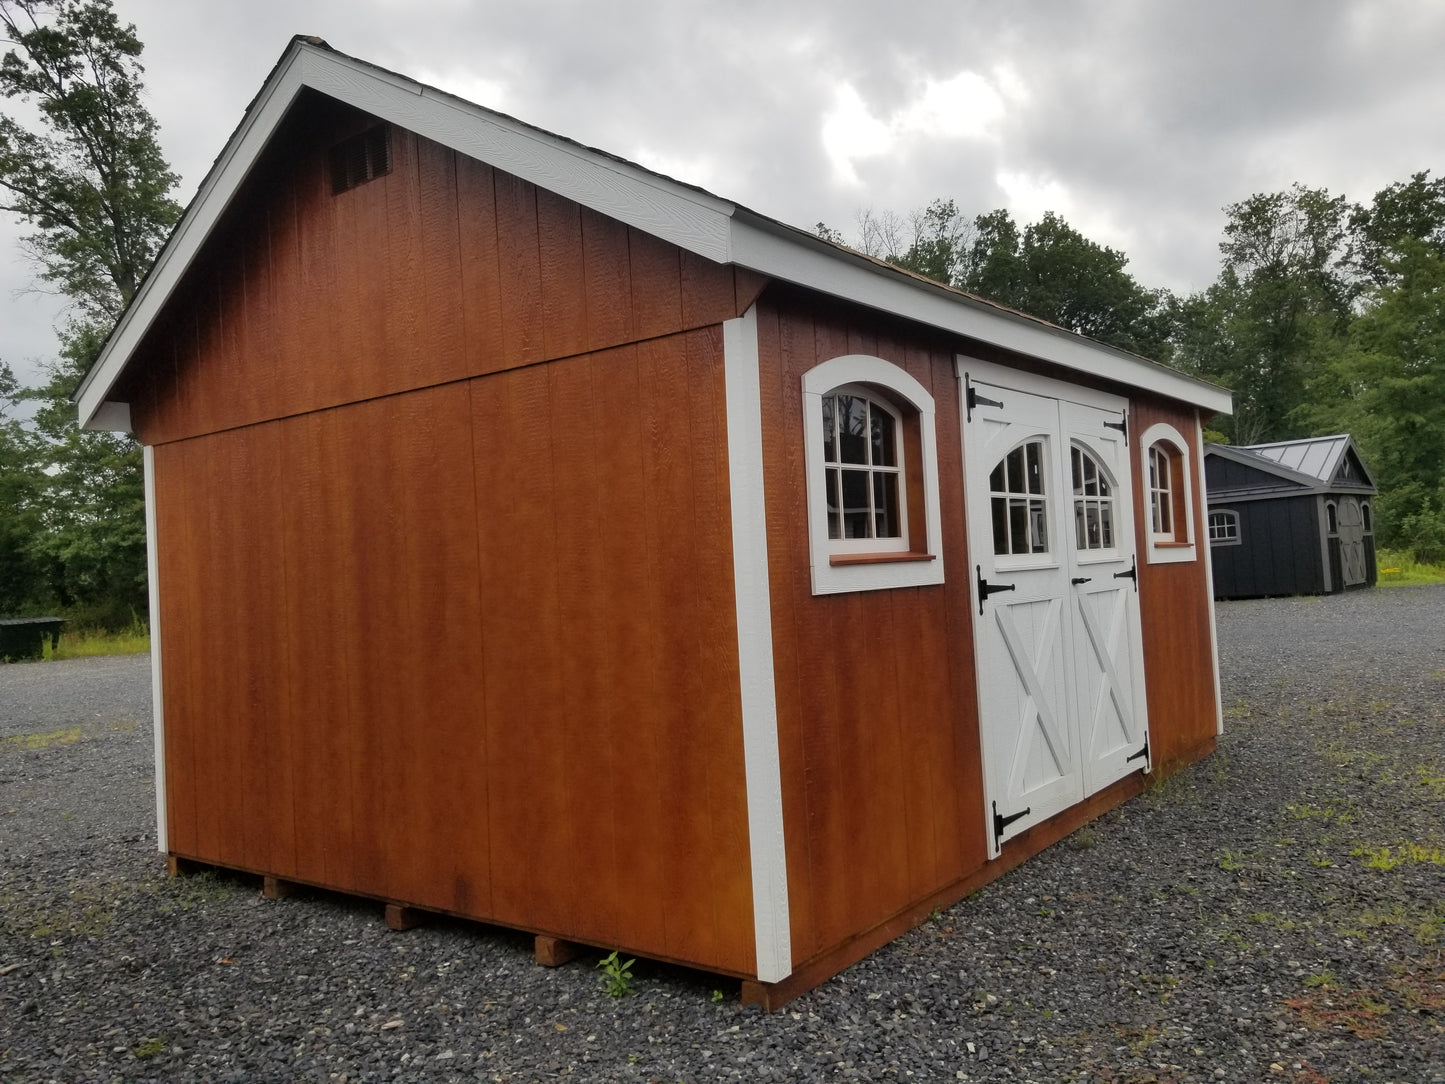 12x16 Garden Shed with SmartTec Siding